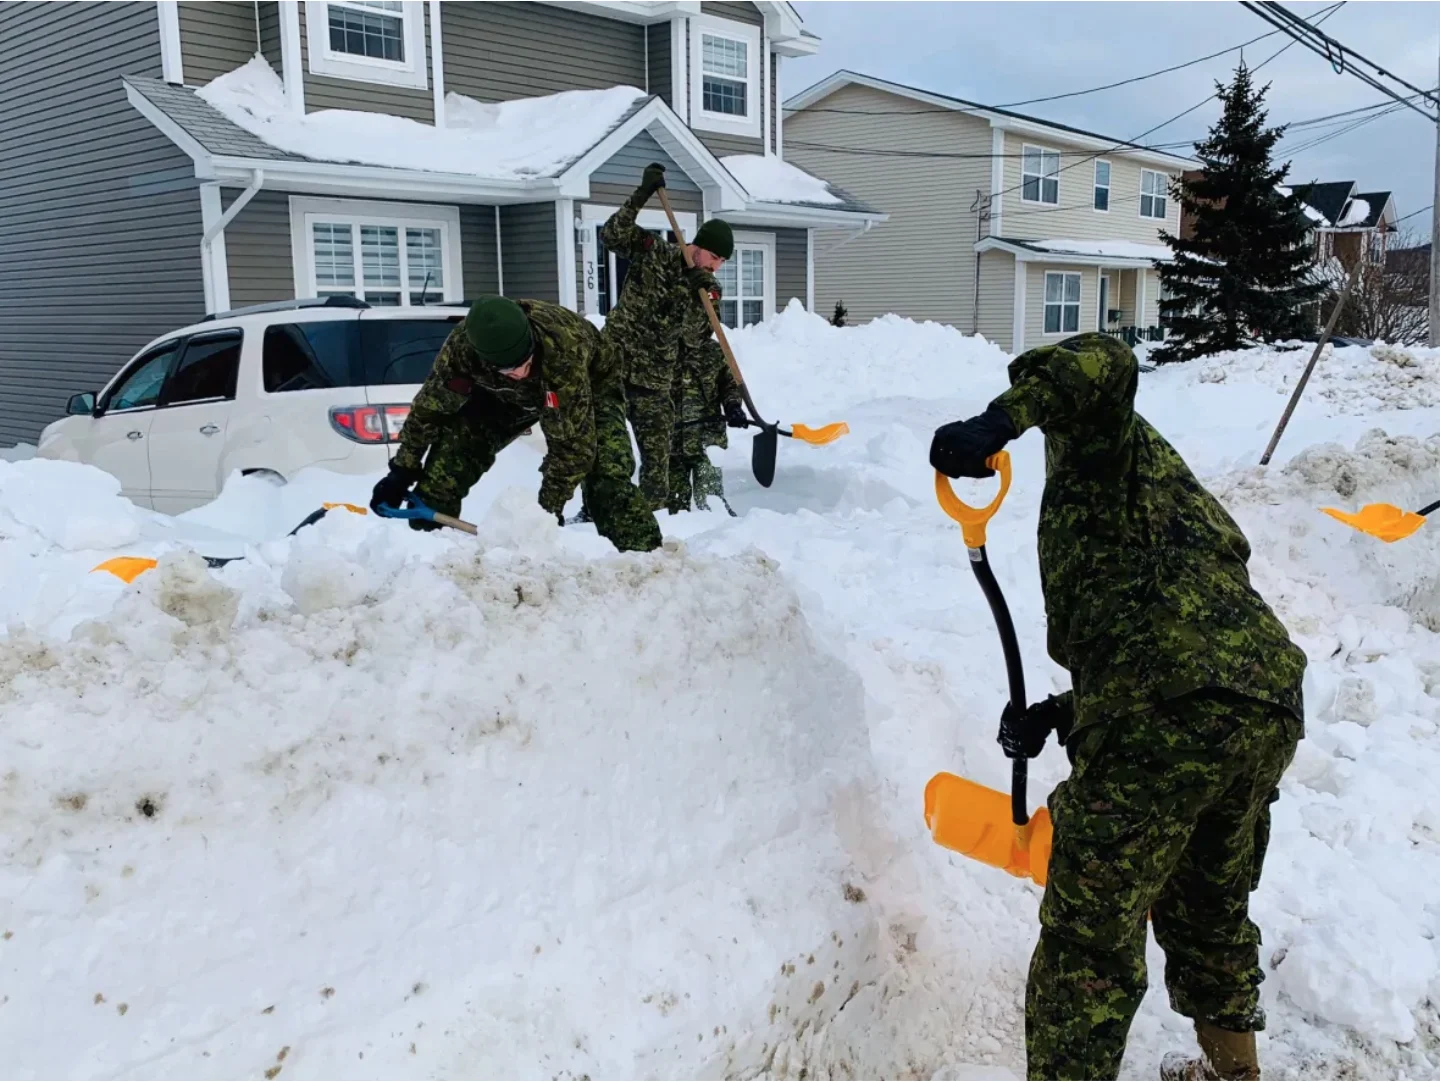 CBC: The province says more than 1,000 calls for help have been logged at the emergency operations centre in St. John's, with over 400 tasks completed so far. (Joint Task Force Atlantic/Twitter )